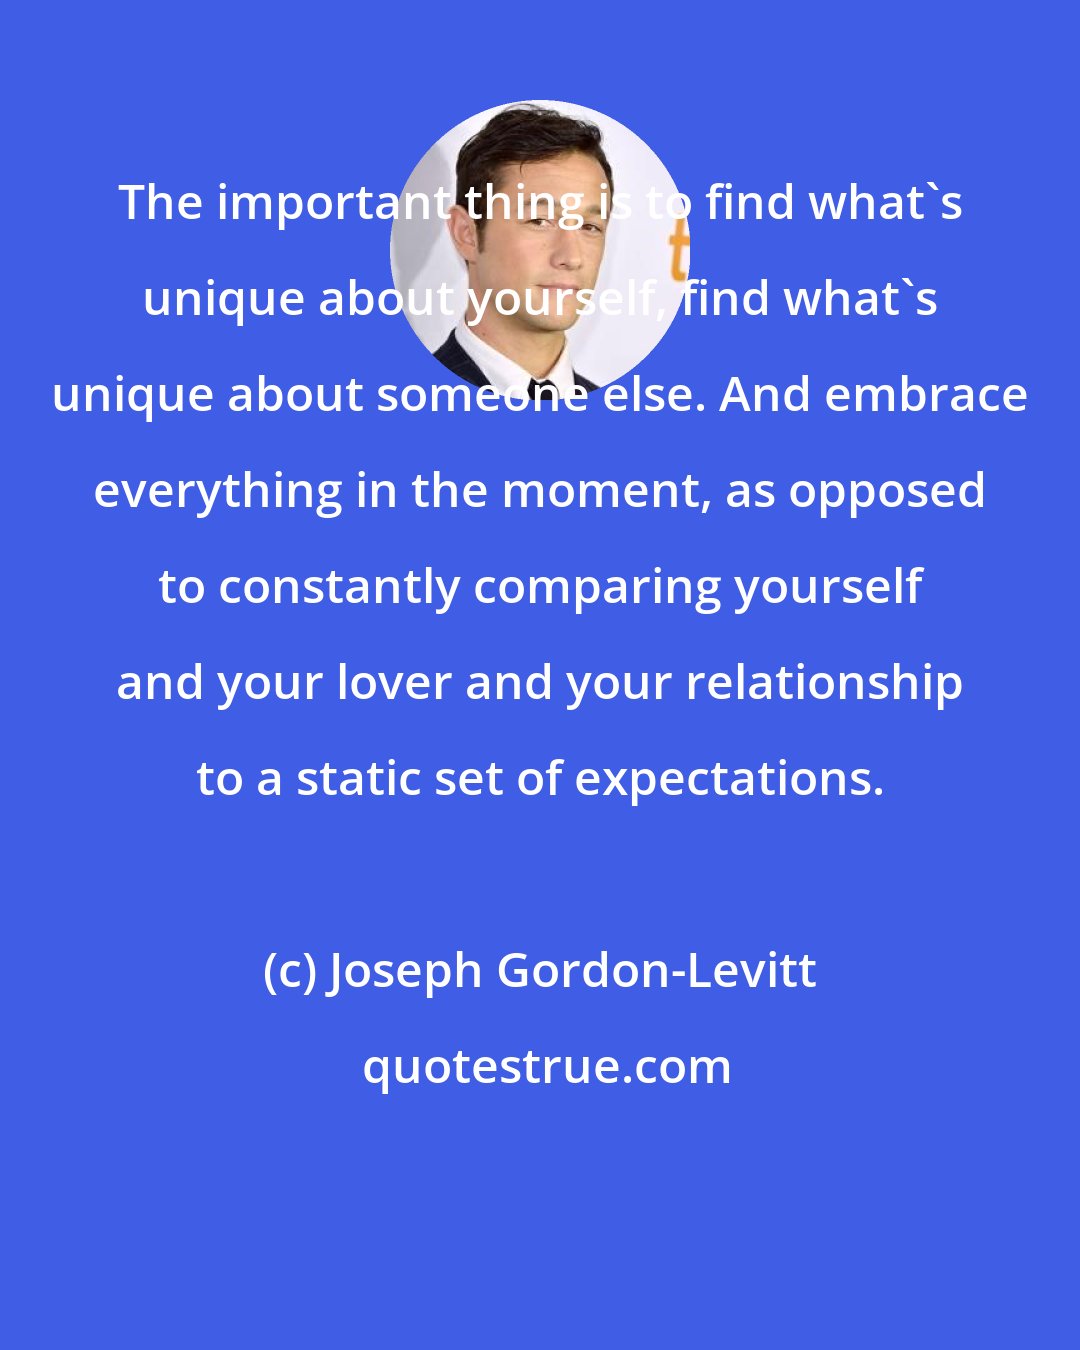 Joseph Gordon-Levitt: The important thing is to find what's unique about yourself, find what's unique about someone else. And embrace everything in the moment, as opposed to constantly comparing yourself and your lover and your relationship to a static set of expectations.